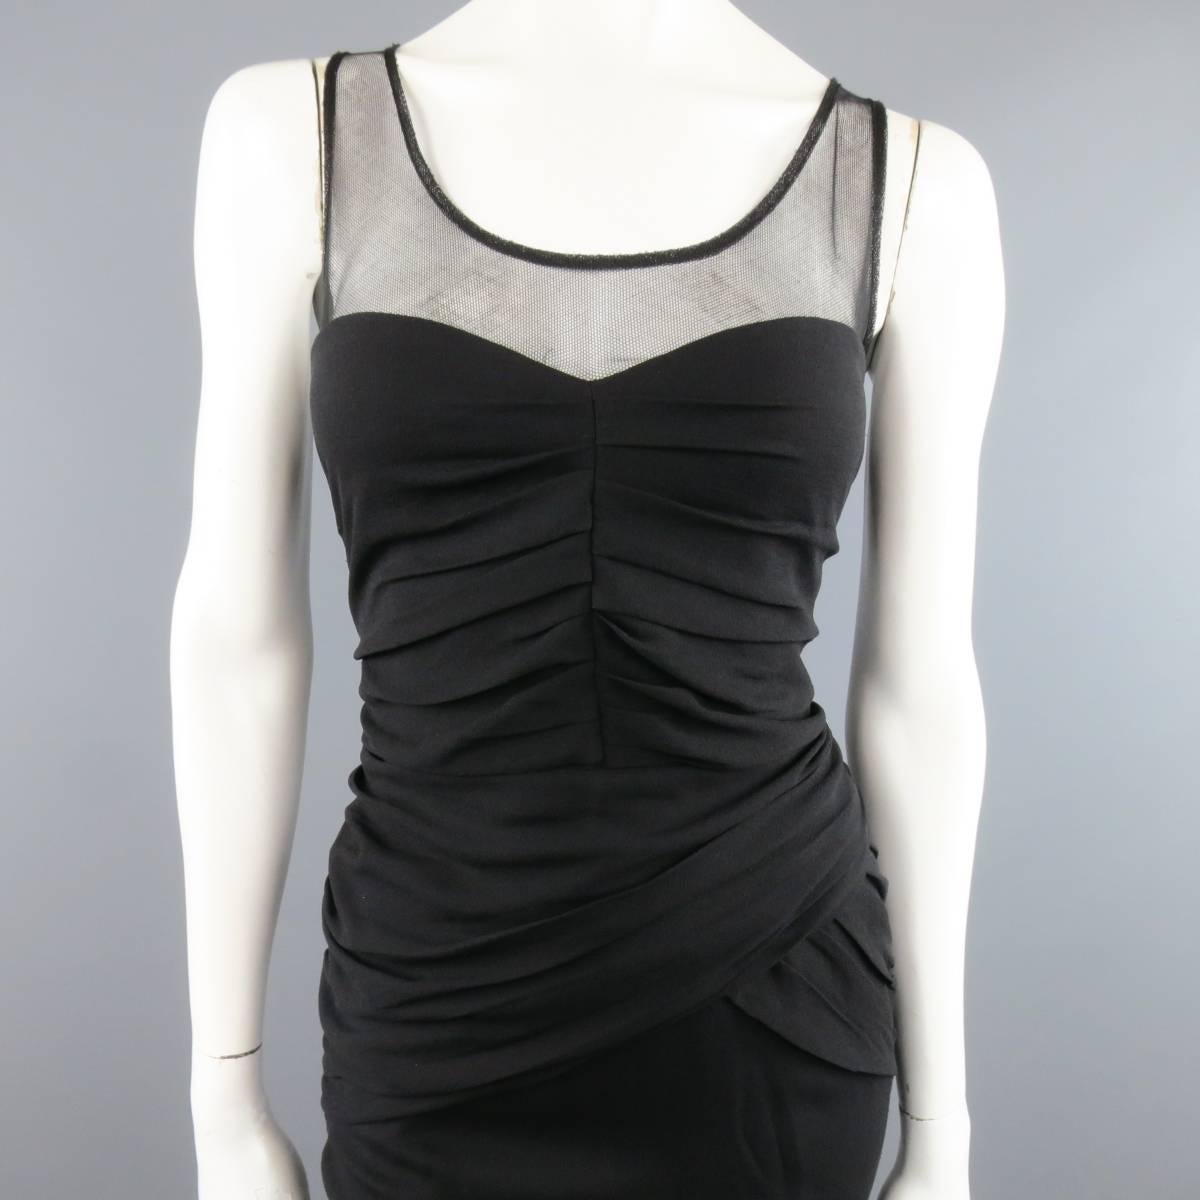 BURBERRY PRORSUM cocktail dress features a light weight pleat draped silk crepe body with sweetheart neckline and mesh scoop neck top. Made in Italy.  Retails at $1995
 
New with Tags.
Marked: IT 46
 
Measurements:
 
Shoulder: 13 in.
Bust: 38